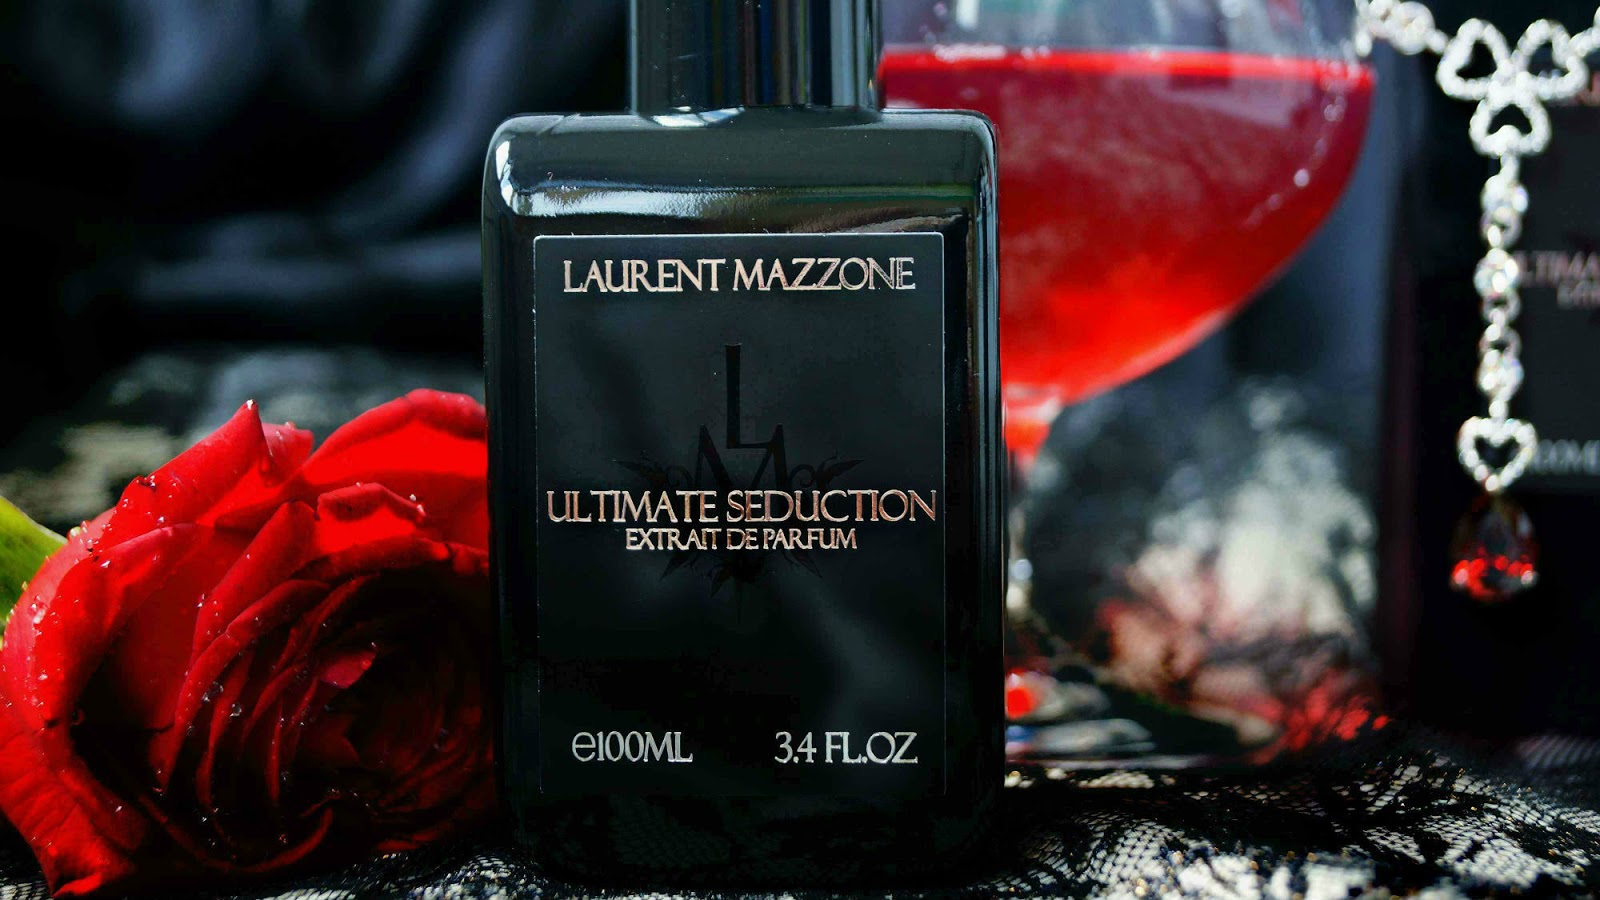 Mazzone pear. LM Parfums Ultimate Seduction. Laurent Mazzone Ultimate Seduction. Парфюм Laurent Mazzone. LM Parfums (Laurent Mazzone Parfums) Dulce Pear.